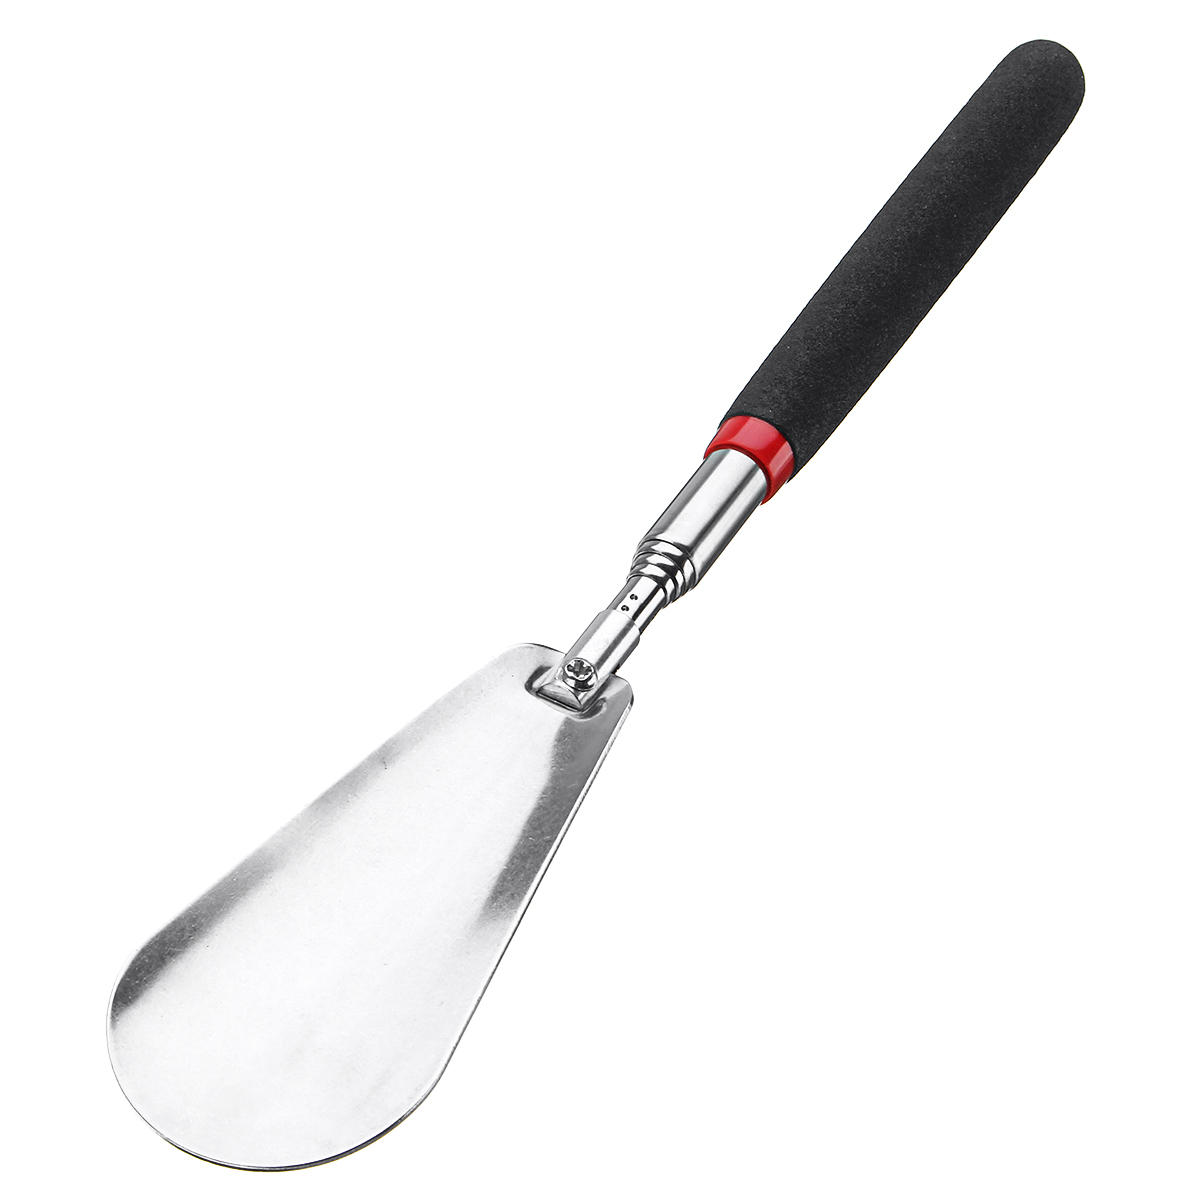 long handled shoe horn in store